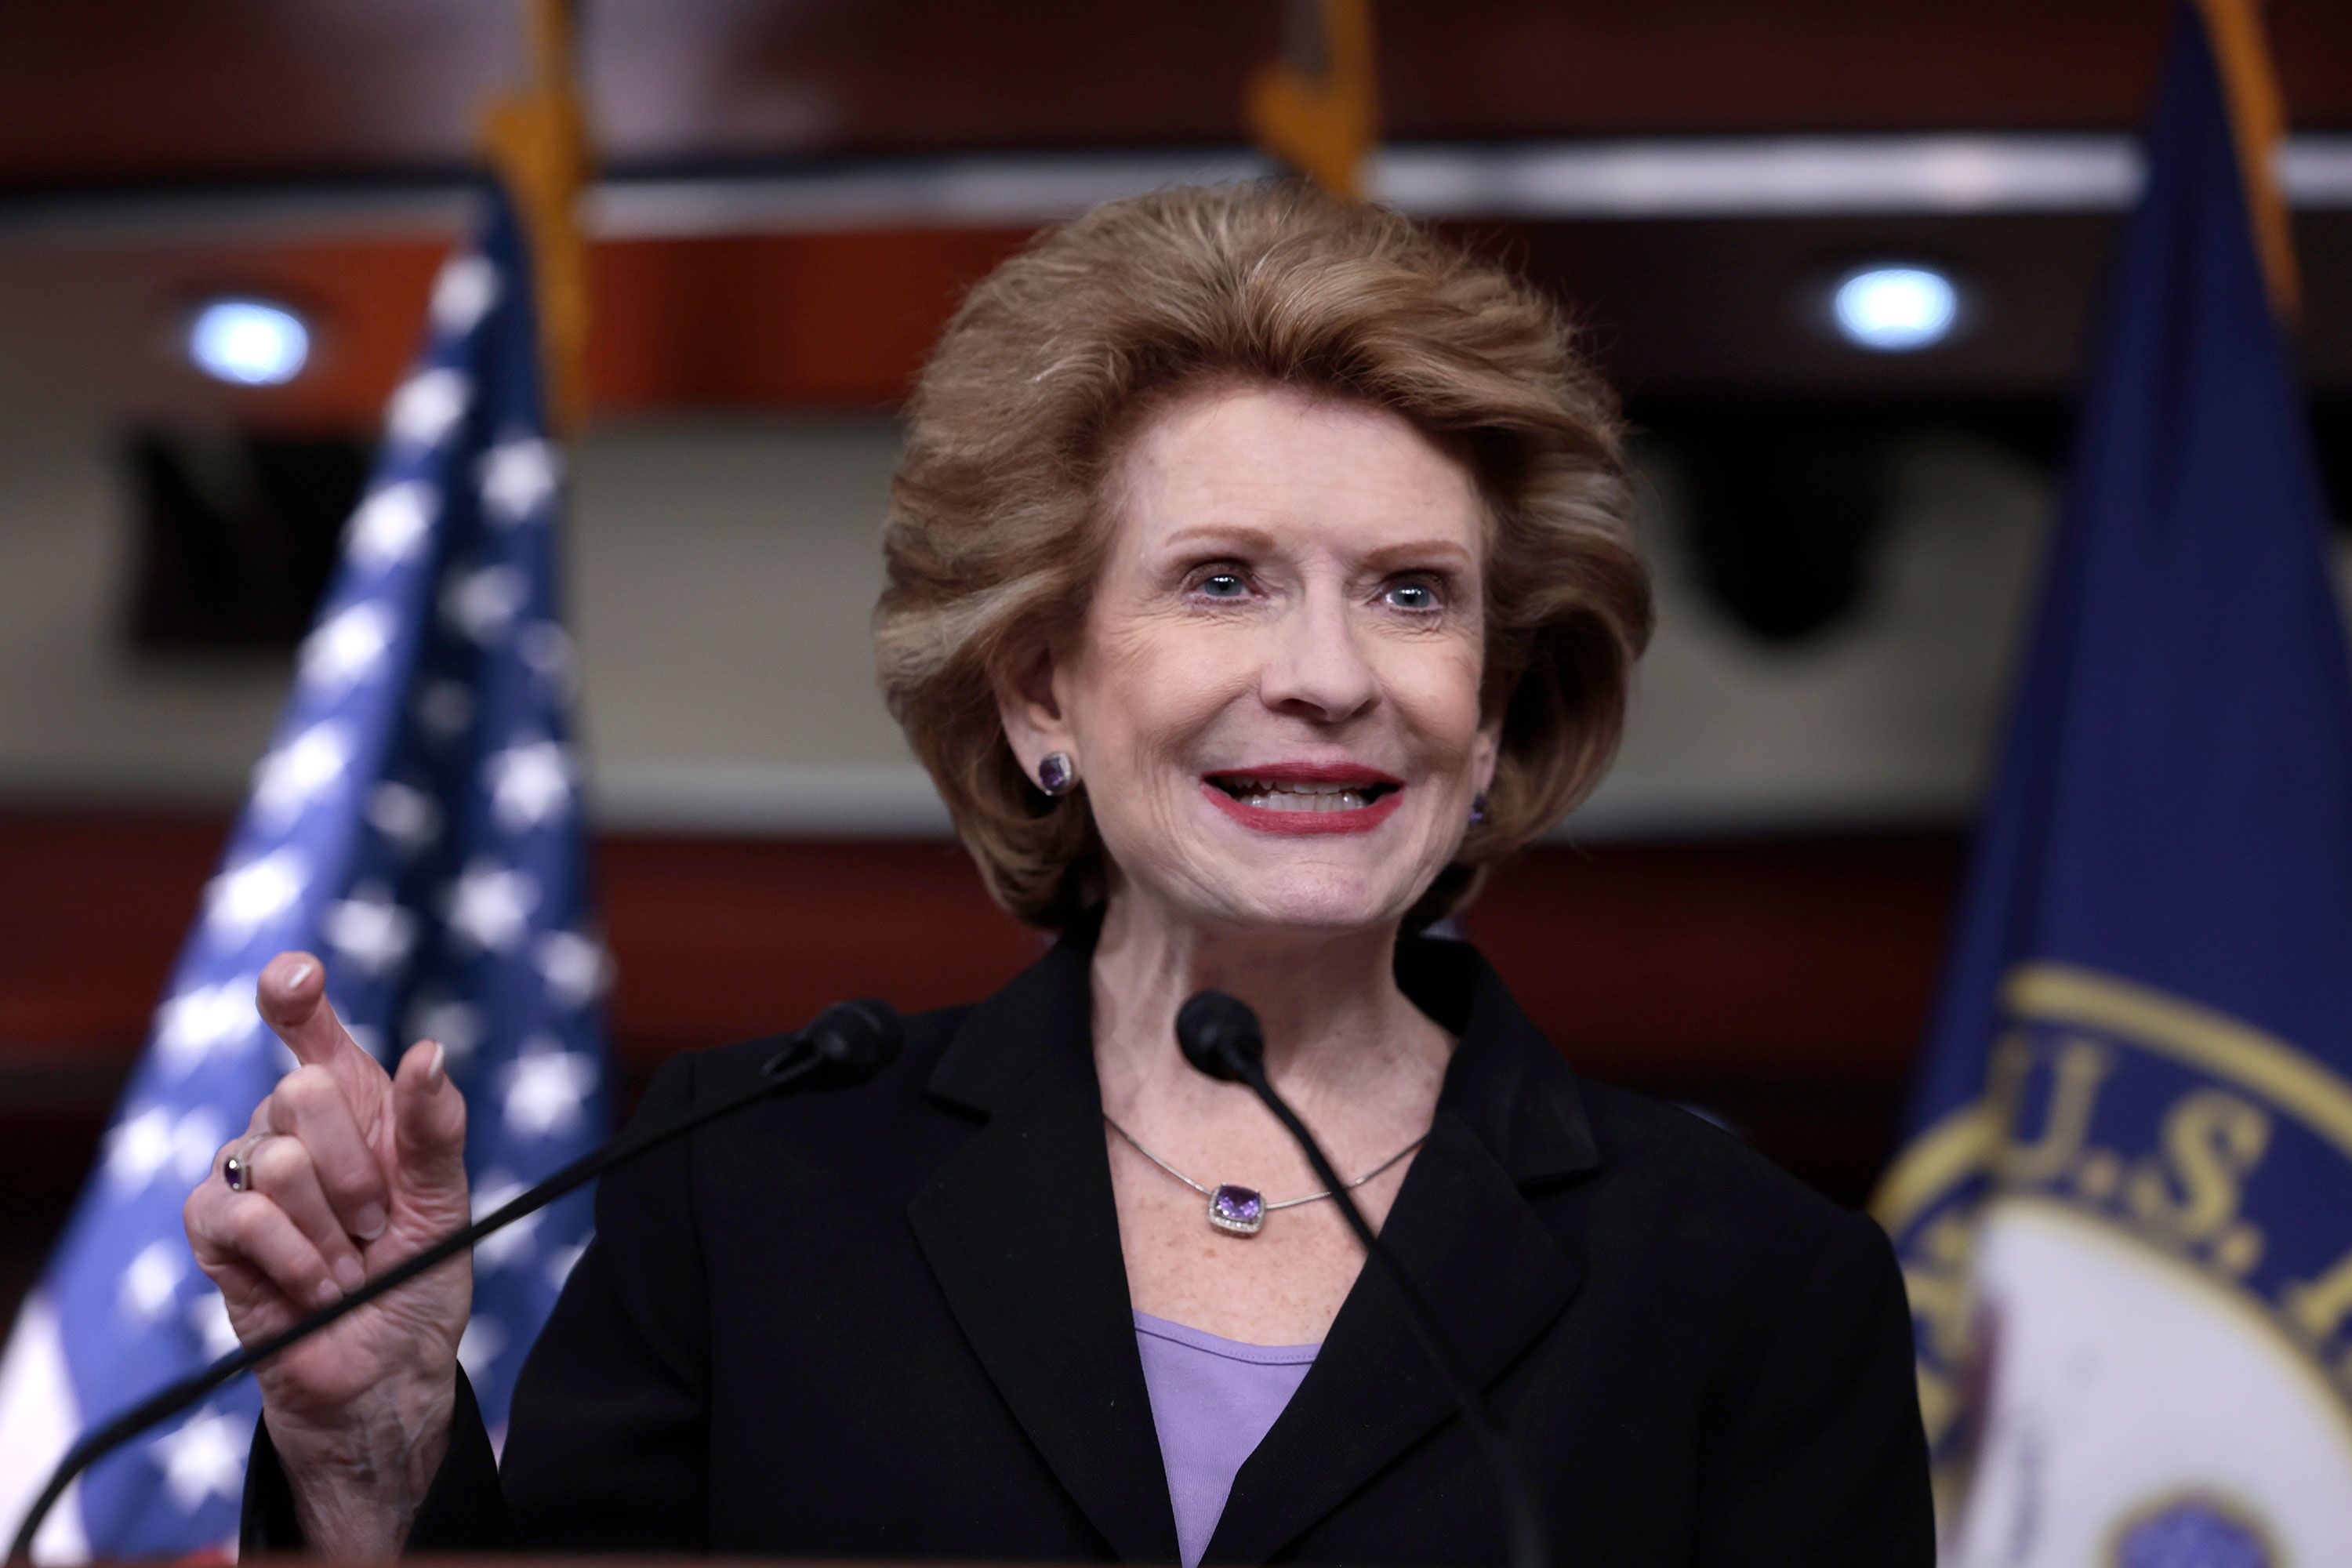 WASHINGTON, DC - MAY 17: Sen. Debbie Stabenow (D-MI), the Senate Committee on Agriculture, Nutrition and Forestry Chairwoman speaks at a press conference on the introduction of legislation to help Americans with the nationwide baby formula shortage at the U.S. Capitol Building on May 17, 2022 in Washington, DC. Later this month the House Appropriations Committee will be holding two hearings to examine the recall of infant formula produced at an Abbott facility, the U.S. Food and Drug Administration's (FDA) handling of the recall, and the subsequent nationwide infant formula shortage. (Photo by Anna Moneymaker/Getty Images)